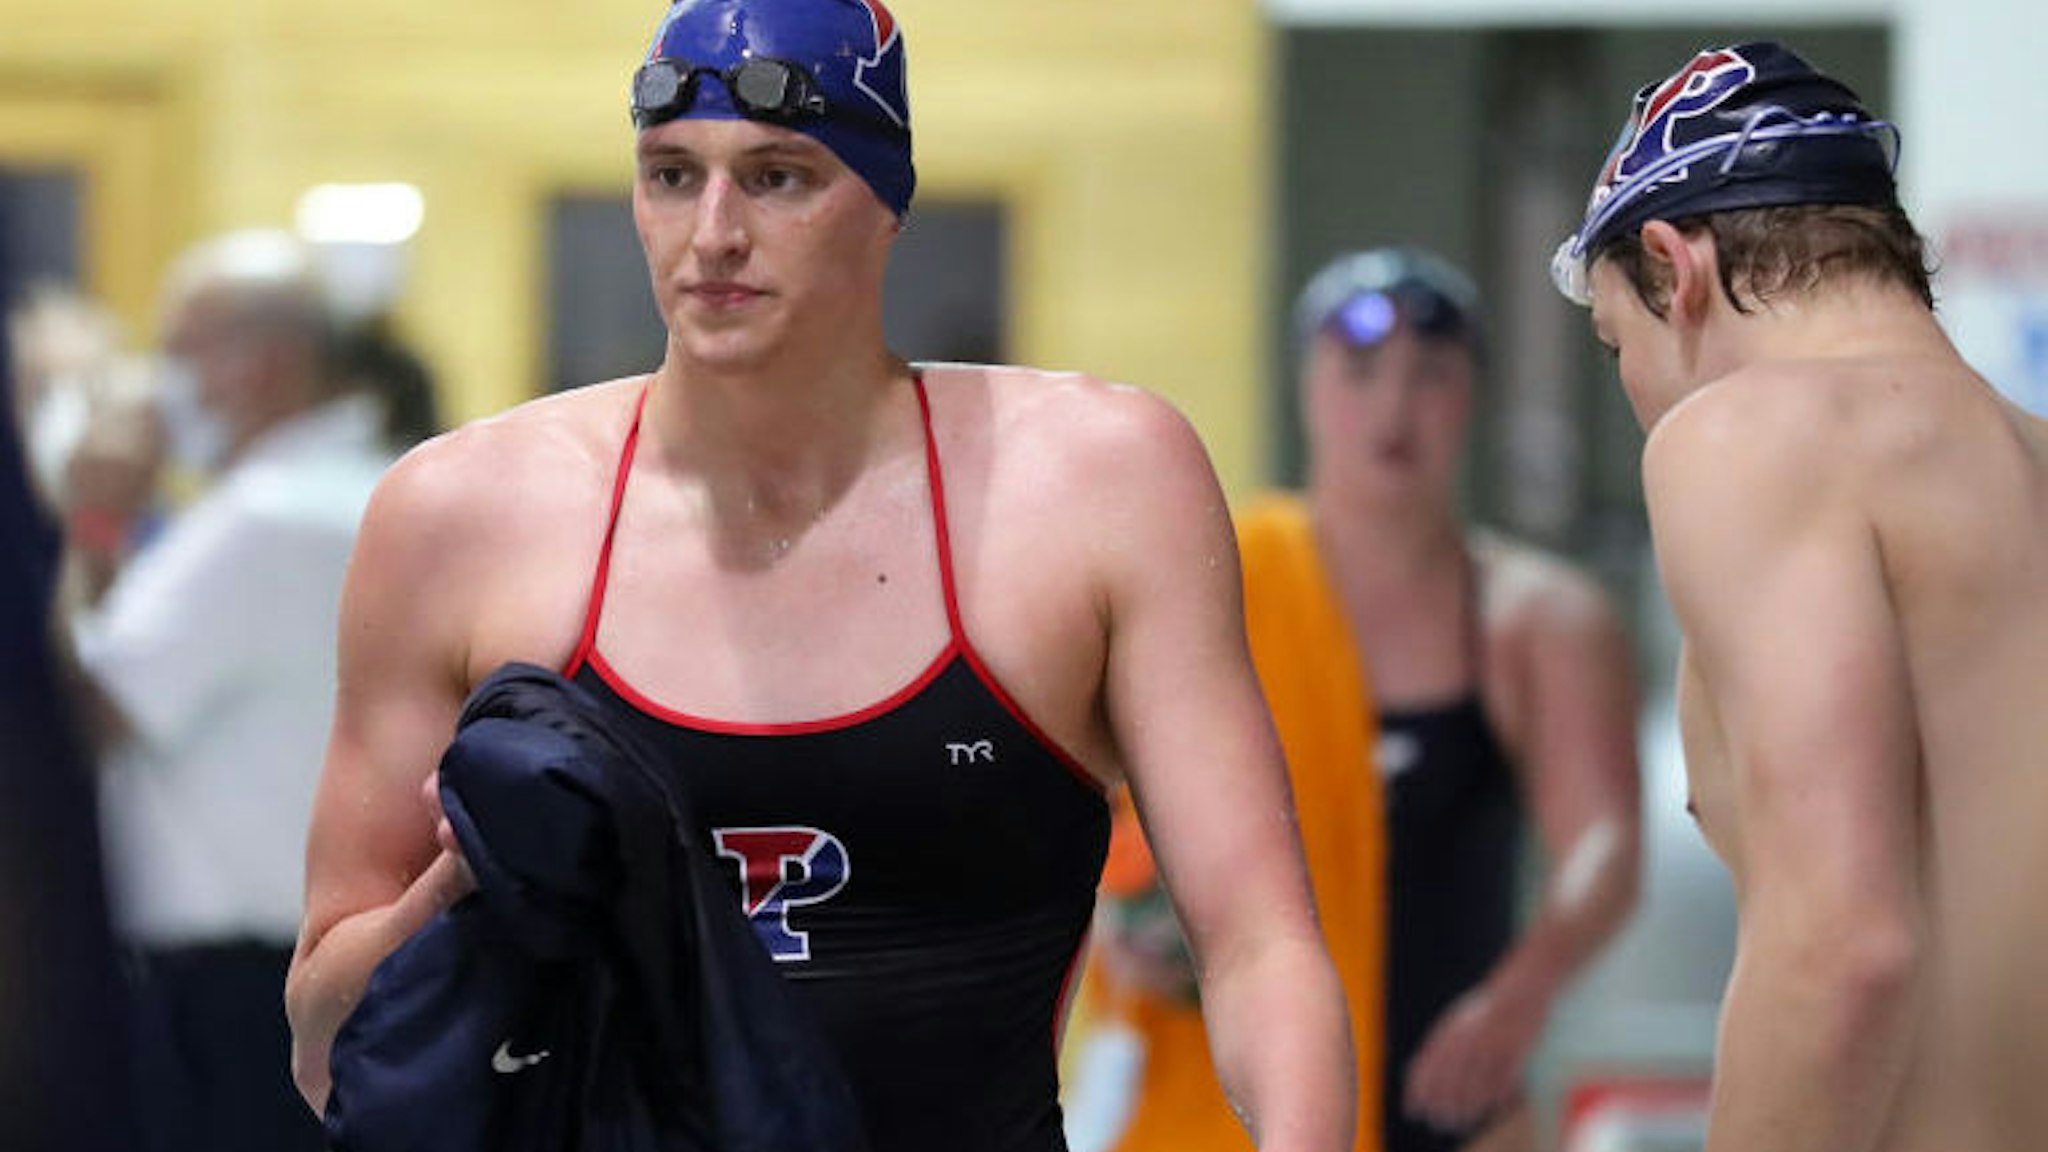 Lia Thomas of the Pennsylvania Quakers after winning the 500 meter freestyle event during a tri-meet against the Yale Bulldogs and the Dartmouth Big Green at Sheerr Pool on the campus of the University of Pennsylvania on January 8, 2022 in Philadelphia, Pennsylvania.